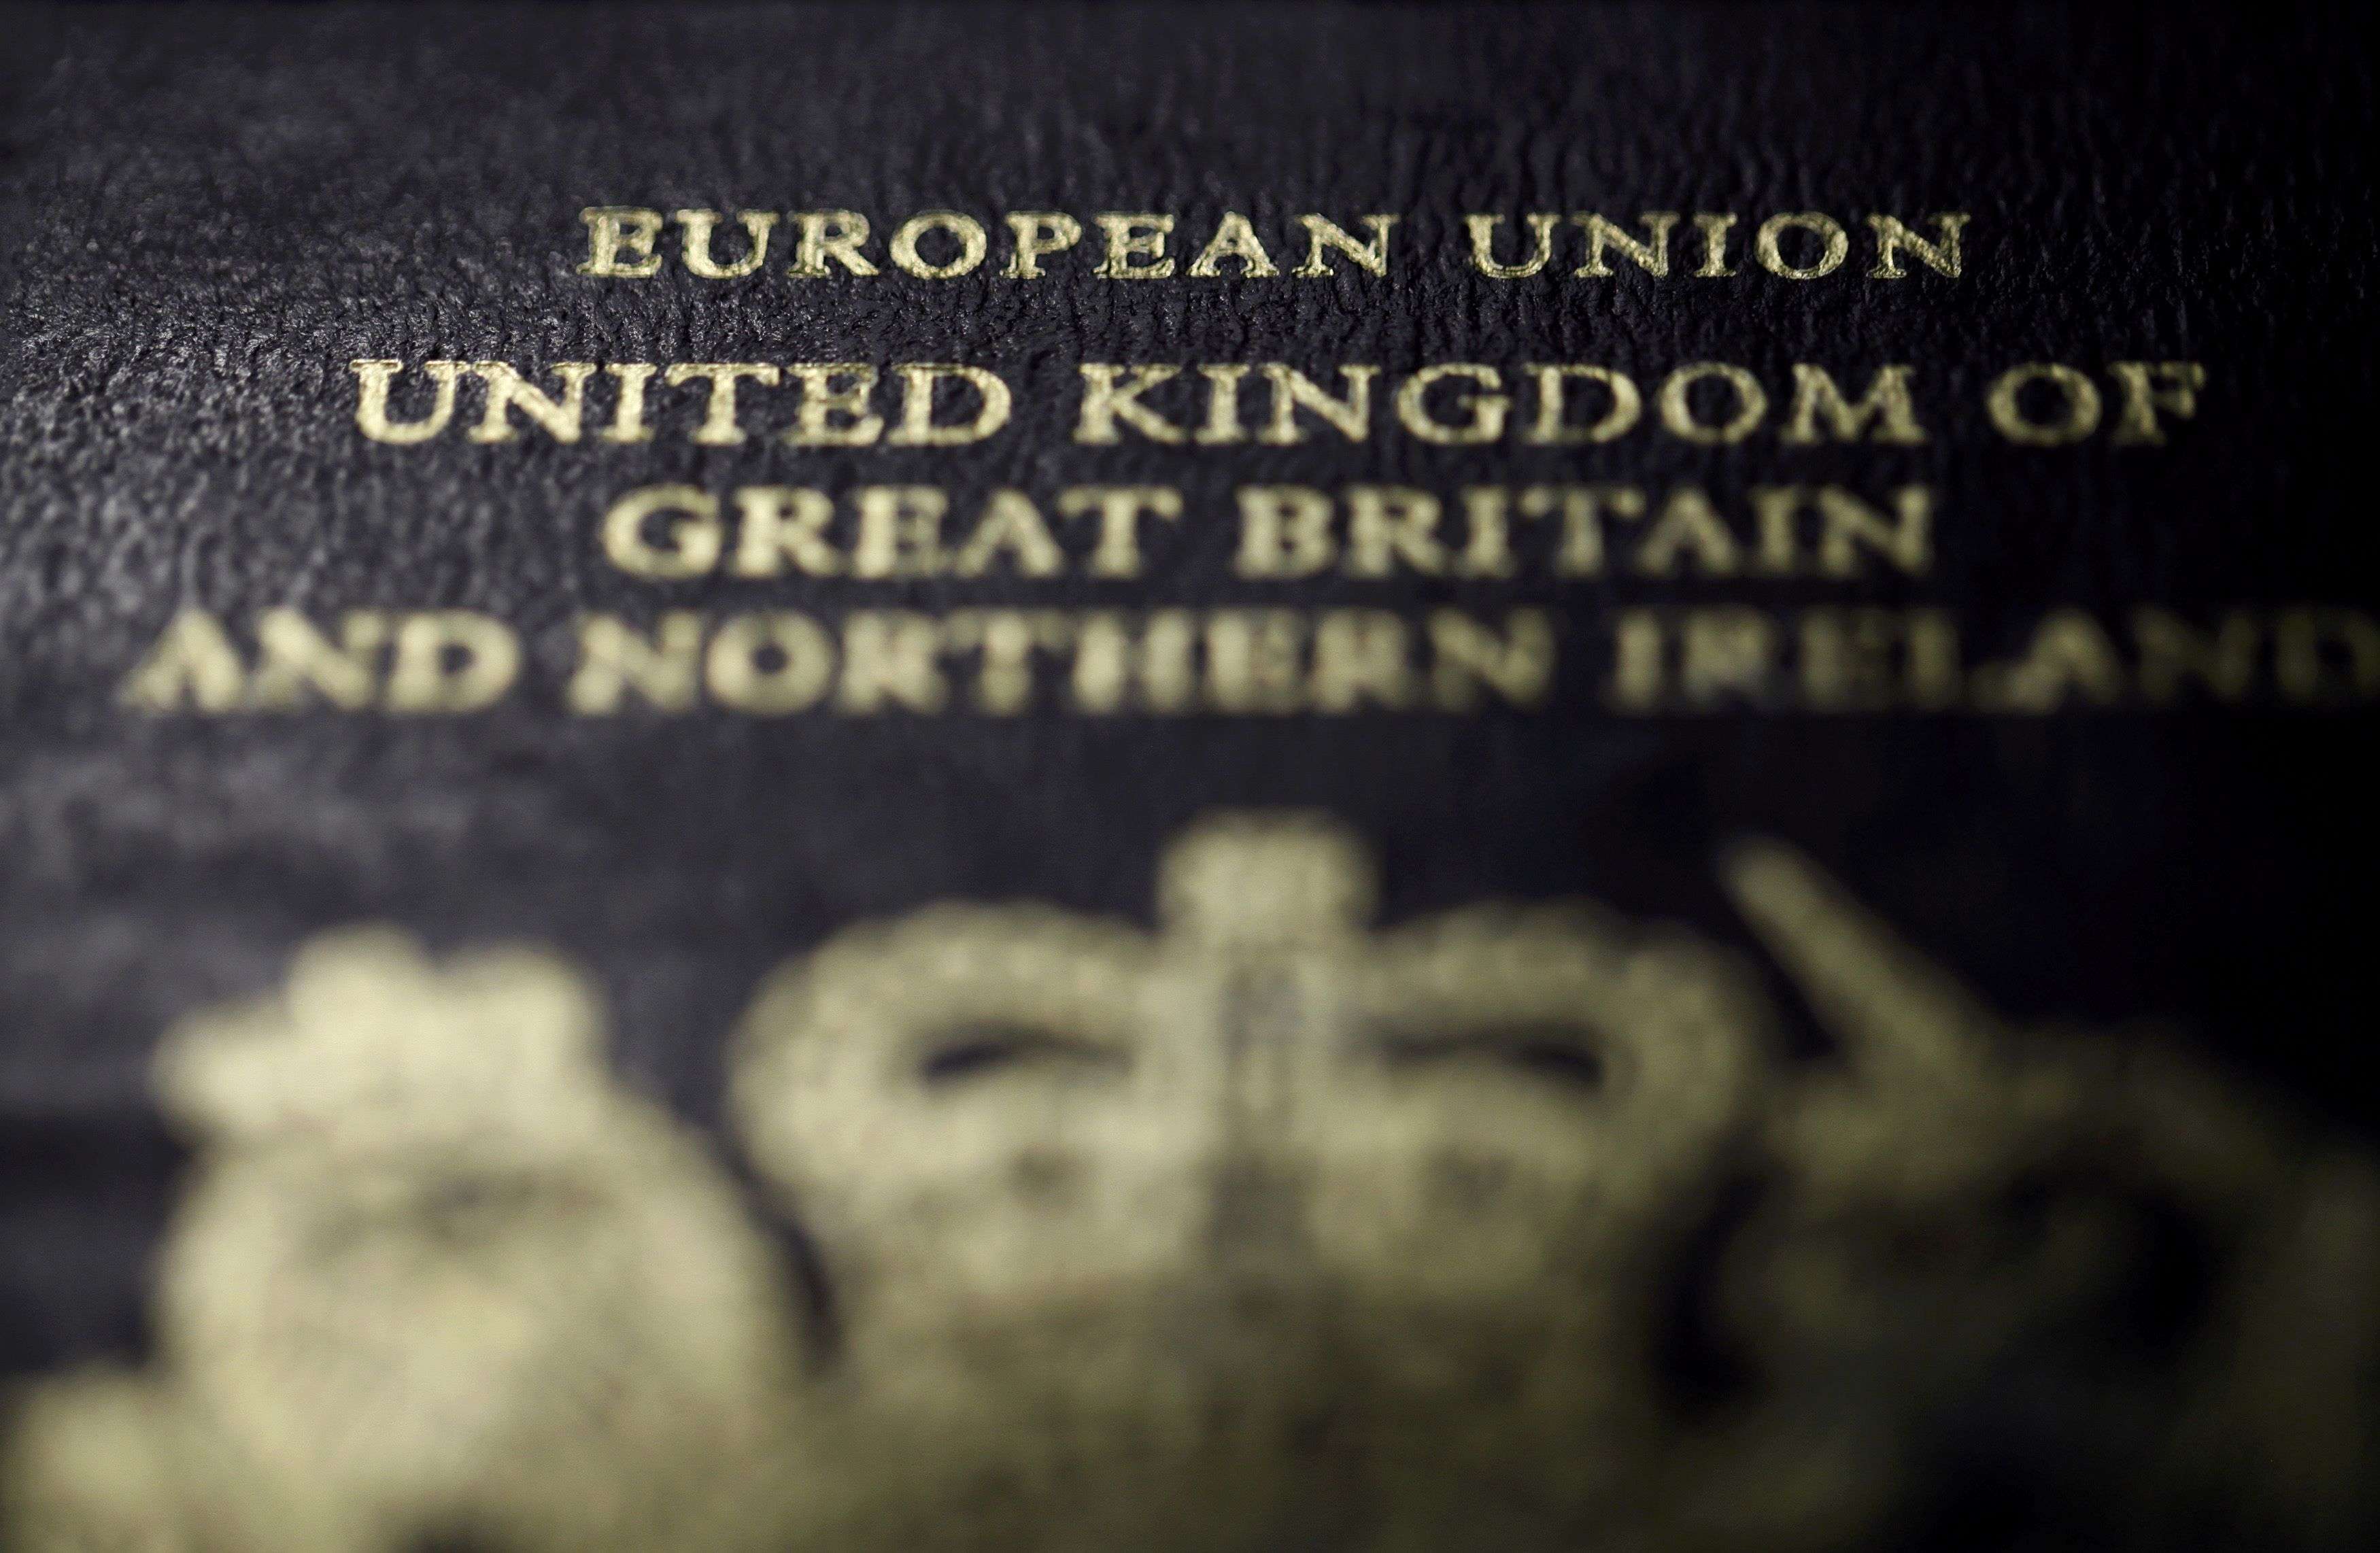 File photo shows the close-up detail of the cover of a European Union British passport pictured in Paris, France,  January 23, 2013. Carmakers and soccer chiefs threw their weight behind the campaign for Britain to stay in the European Union June 20, 2016, as opinion polls showing the "Remain" camp gaining ground buoyed shares and sterling three days ahead of the referendum.  REUTERS/Mal Langsdon/File Photo